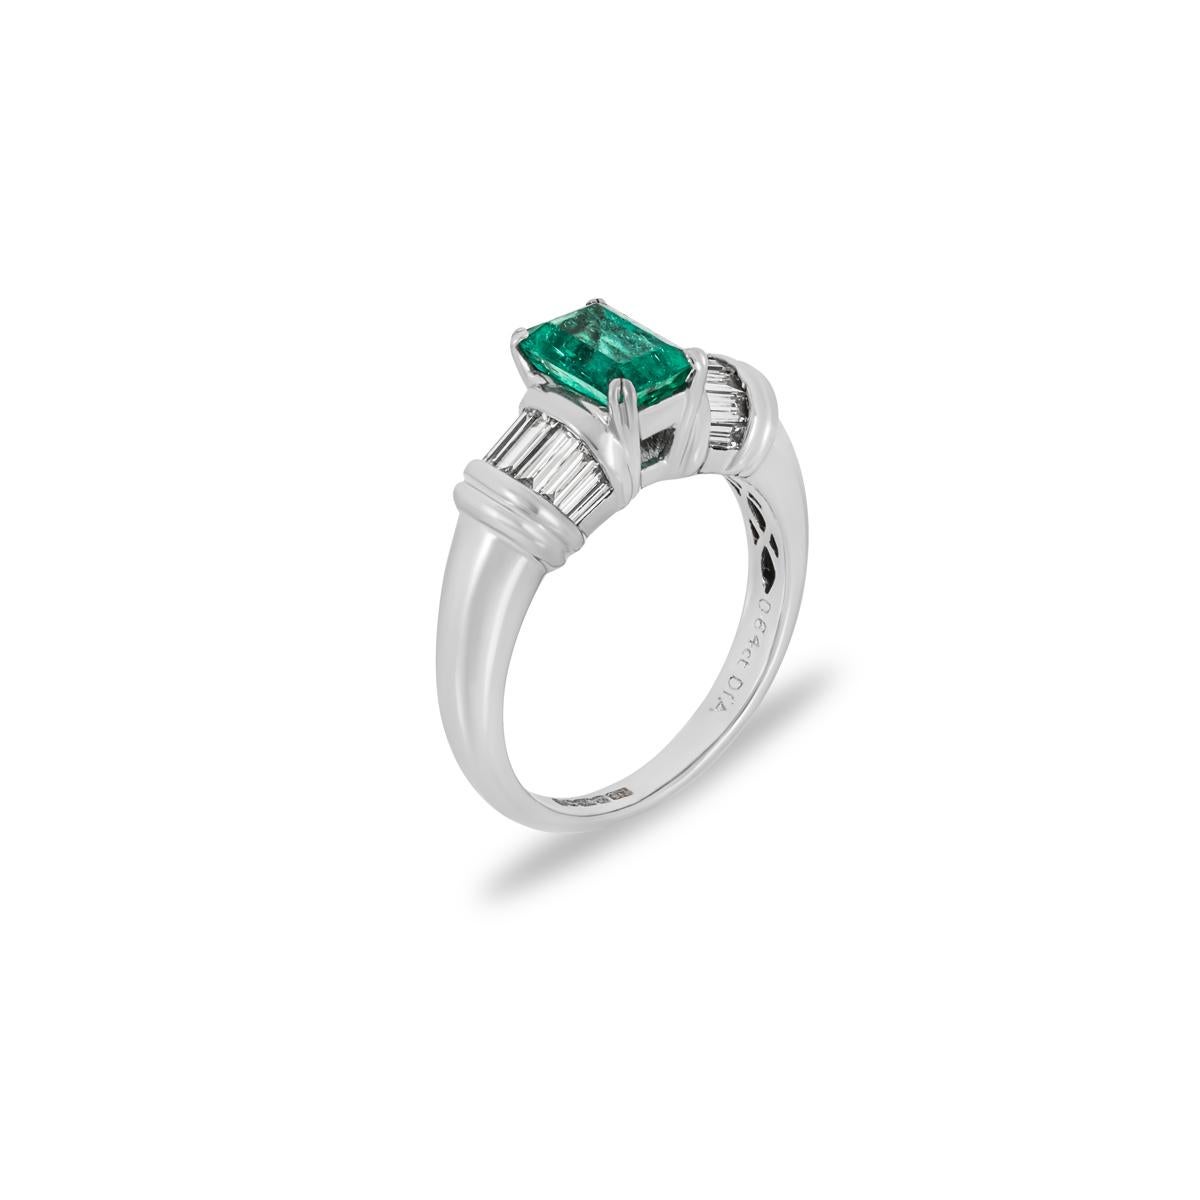 A gorgeous 18k white gold emerald and diamond ring. Set to the centre is an emerald cut Colombian emerald weighing 1.35ct and displaying a vibrant green hue. Accentuating the emerald are 12 tapered baguettes tension set to the shoulders with an